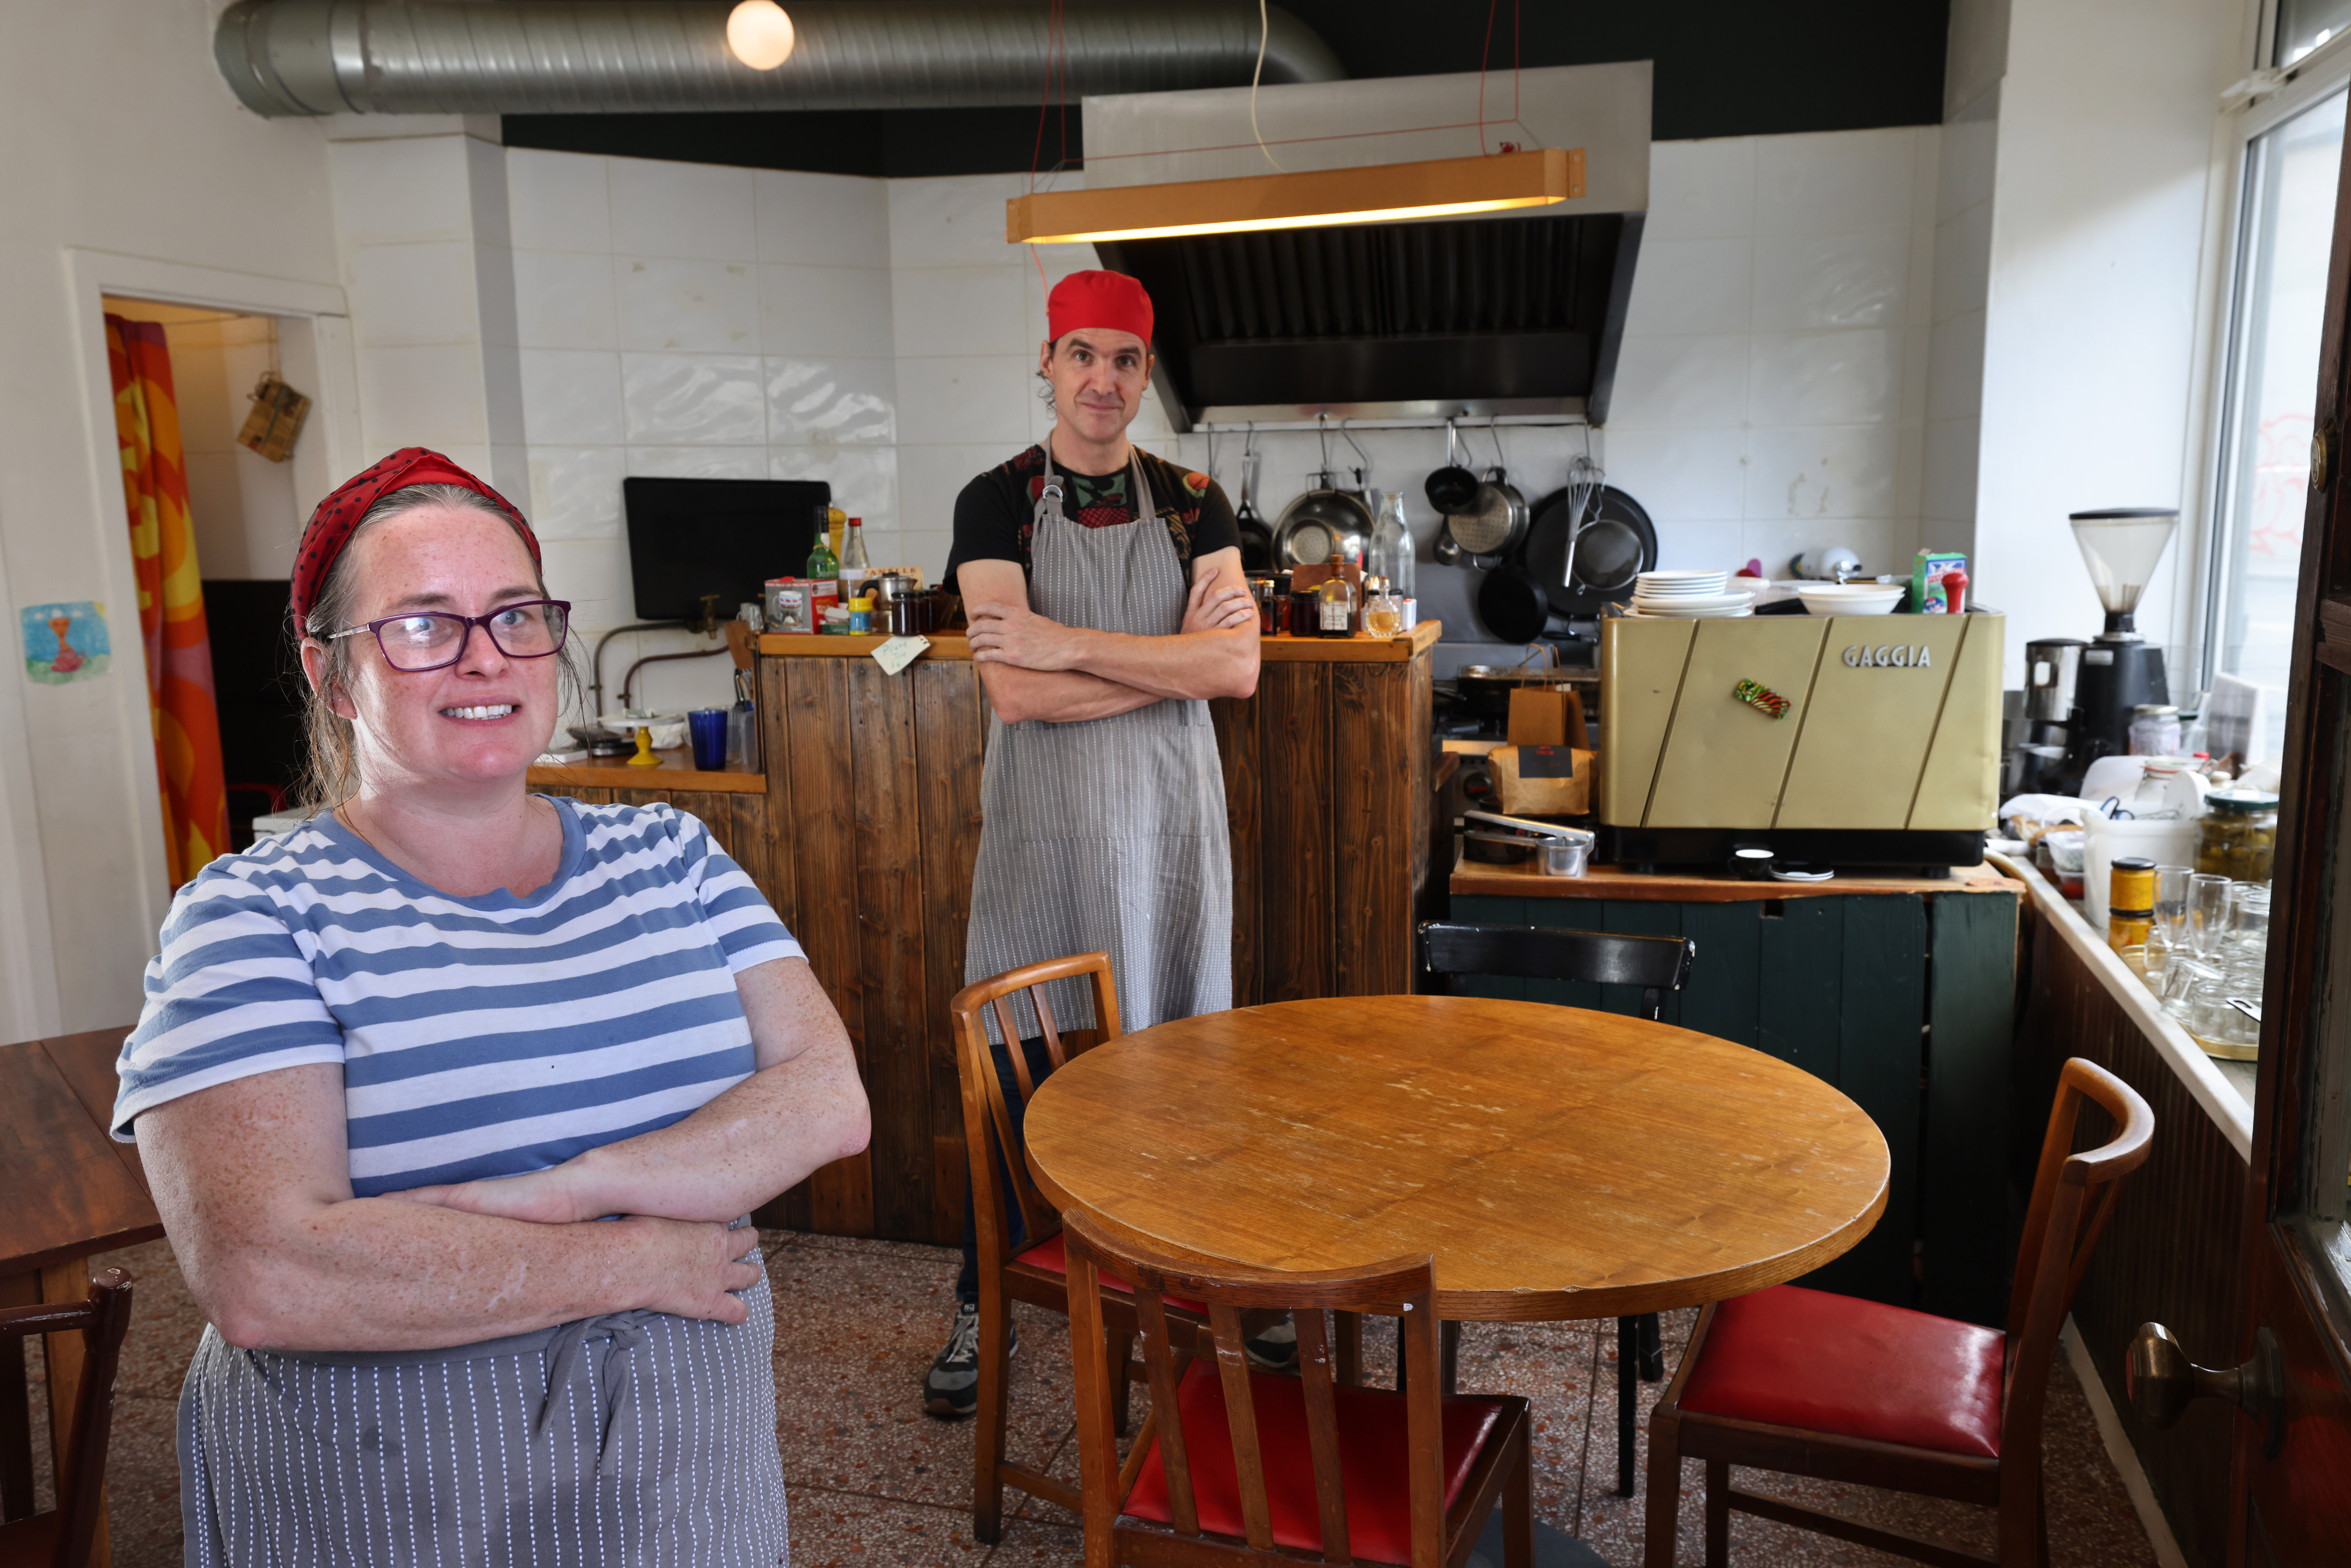 5 reasons to support local coffee shops, by Sophie Gregan